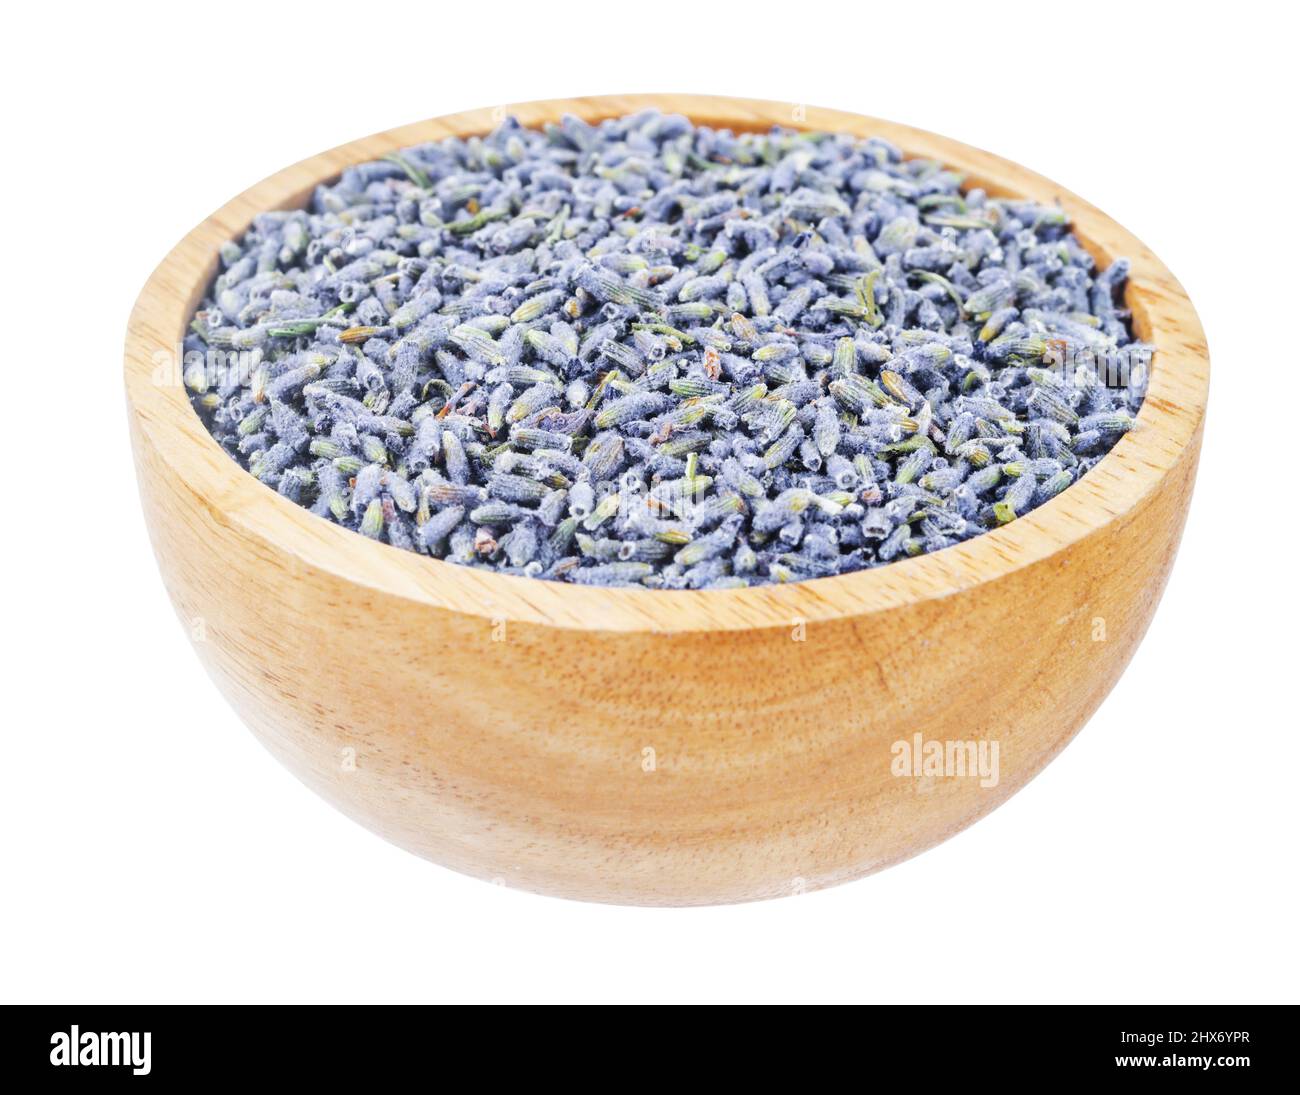 Dry lavender flowers in wooden bowl isolated on white background, Save clipping path. Stock Photo